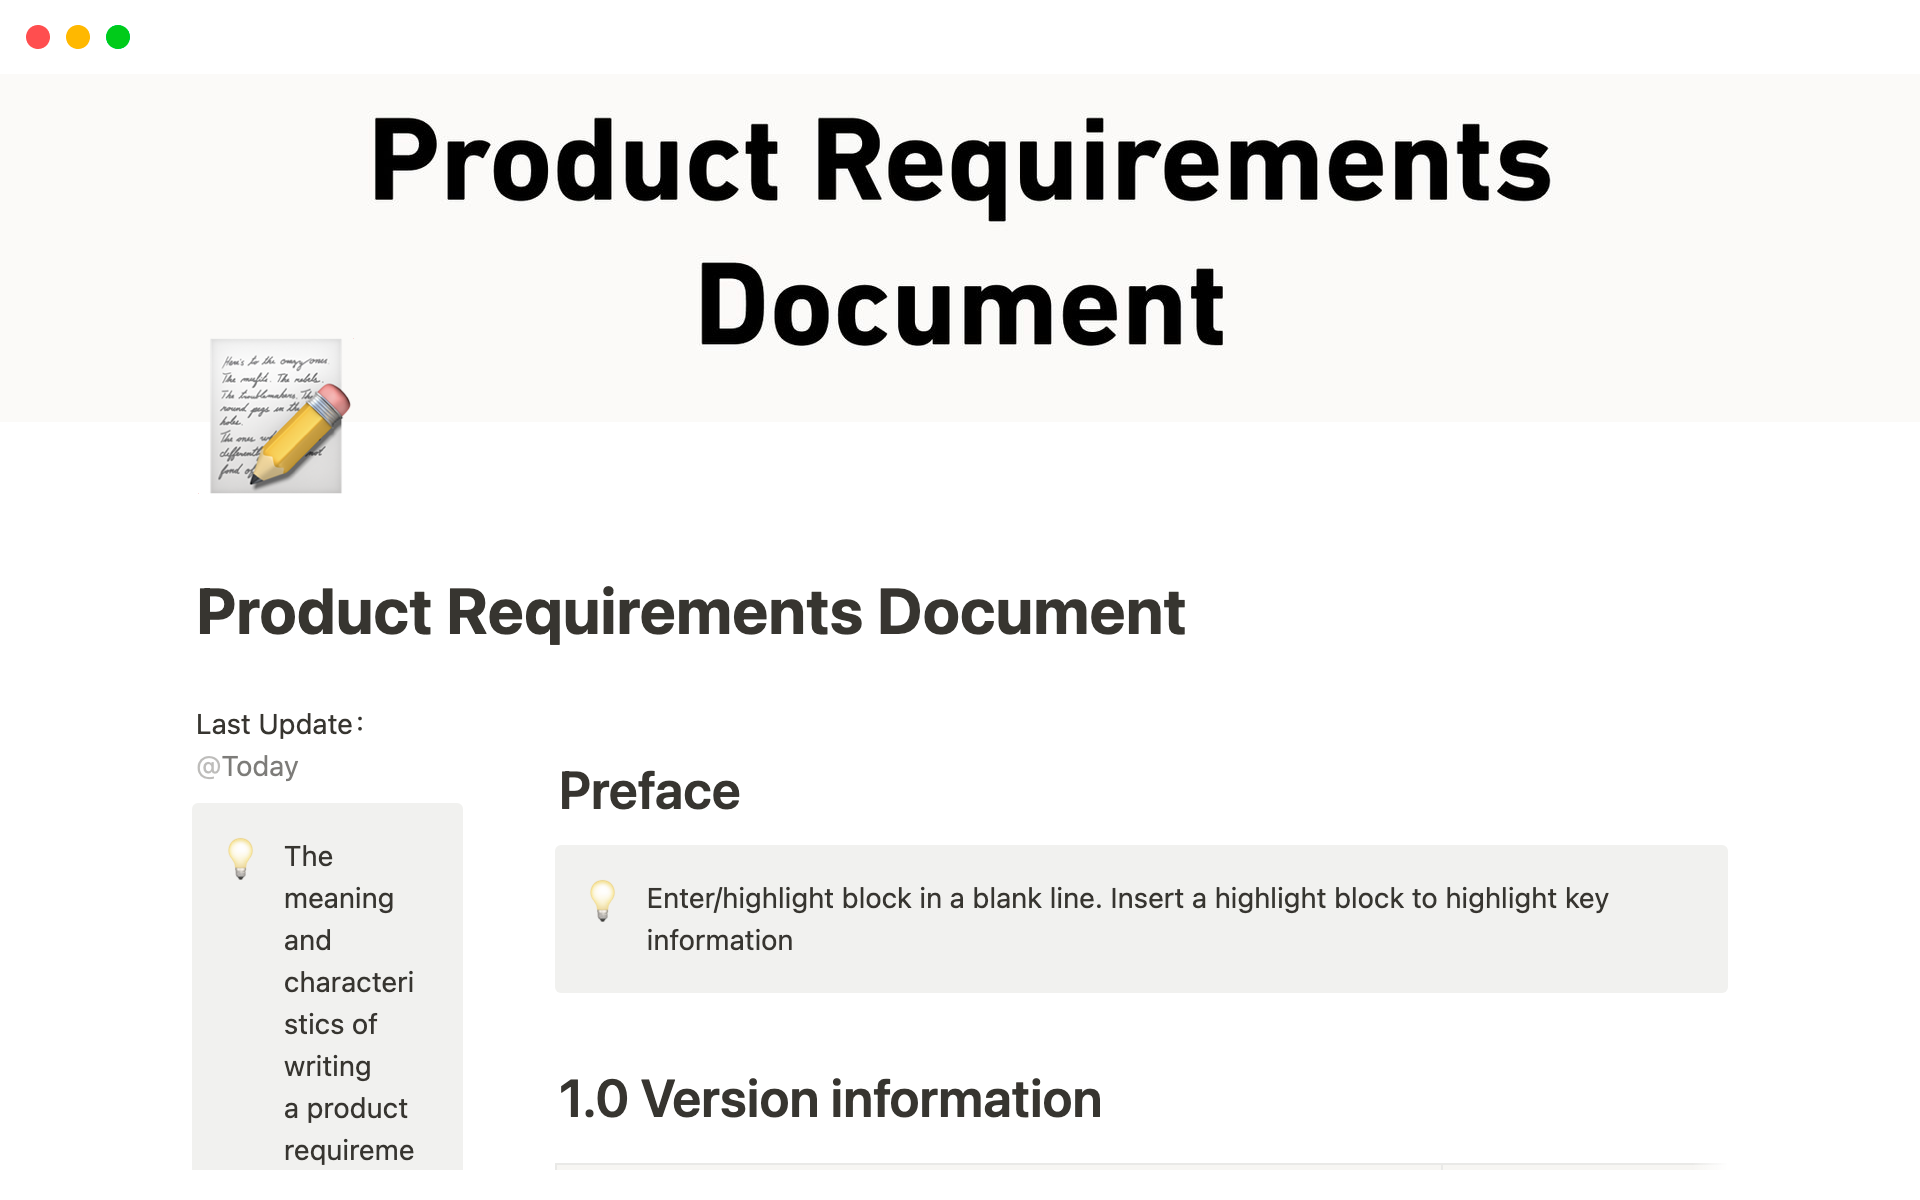 A product requirements document (PRD) is a document that describes product information that ensures team agreement, guides the development process, and ultimately achieves product goals.